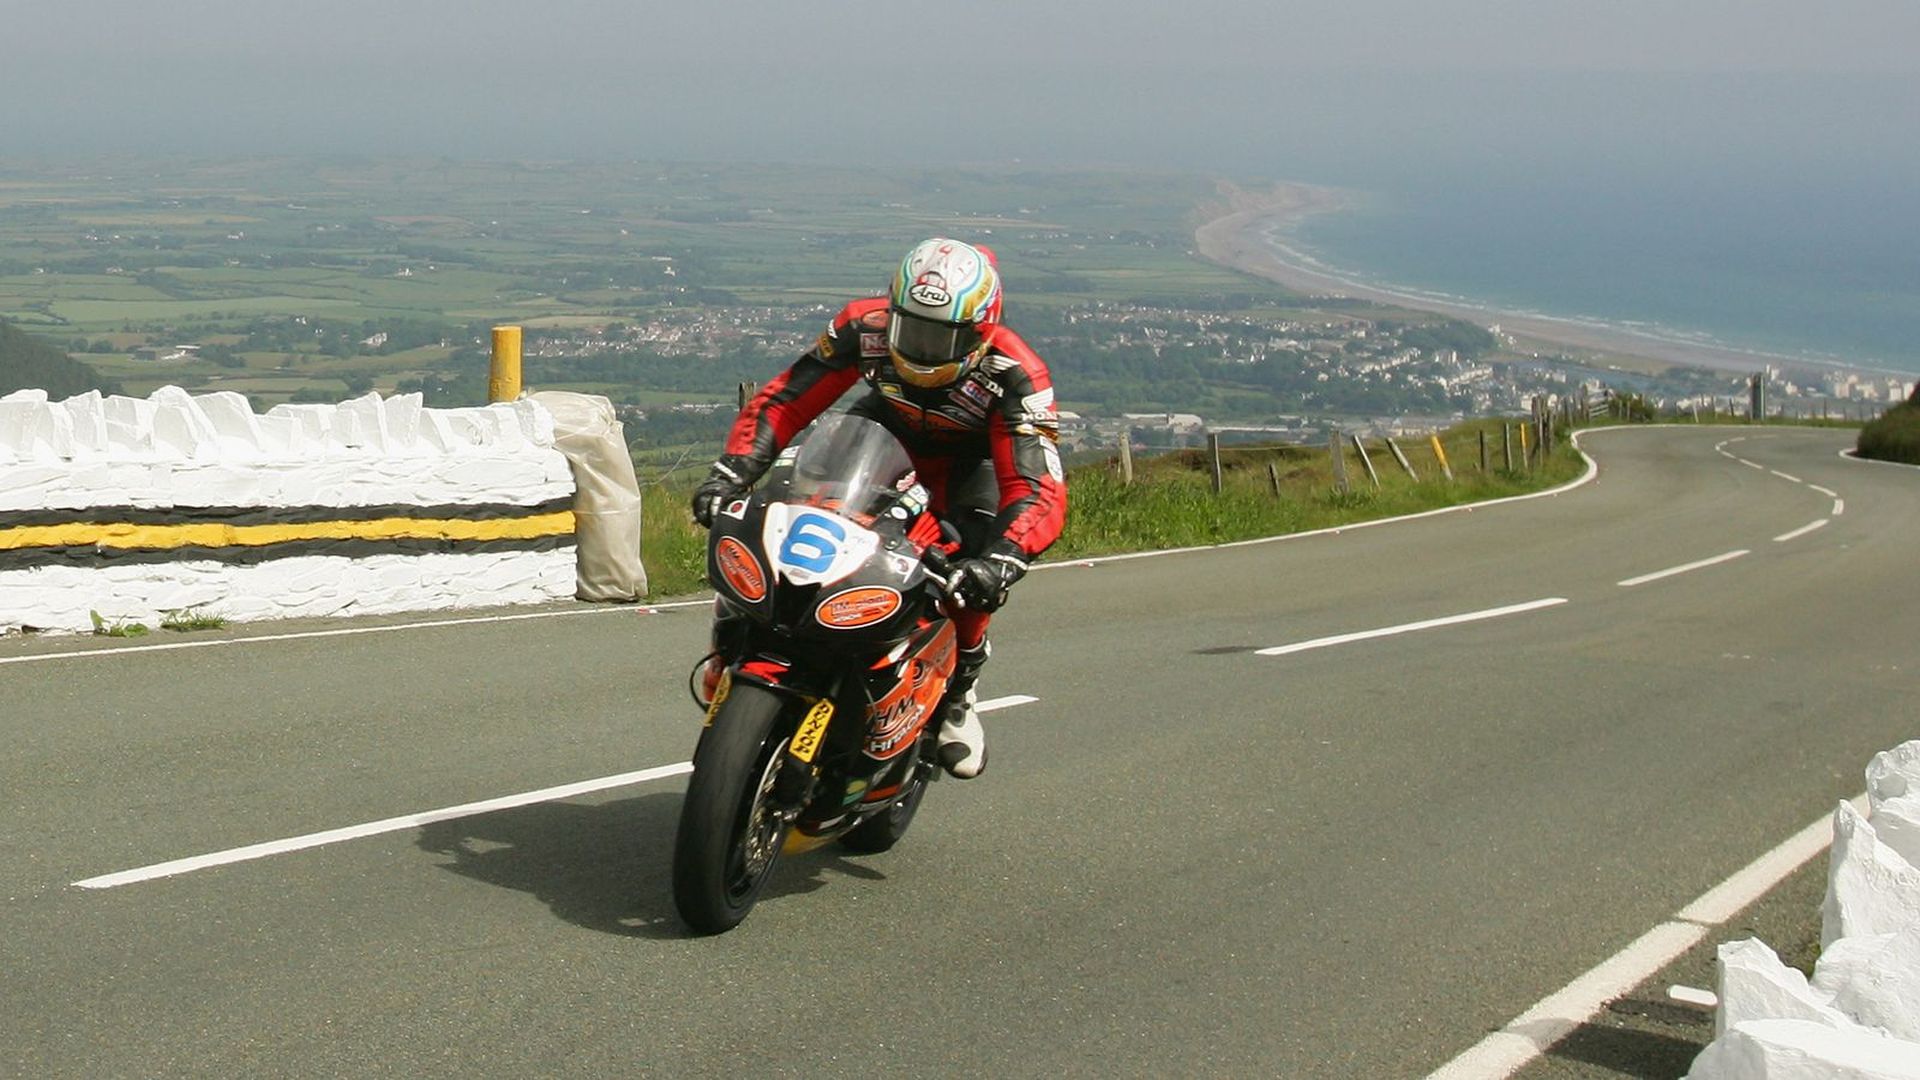 A racer on a motorcycle in the 2007 Isle of Man TT.